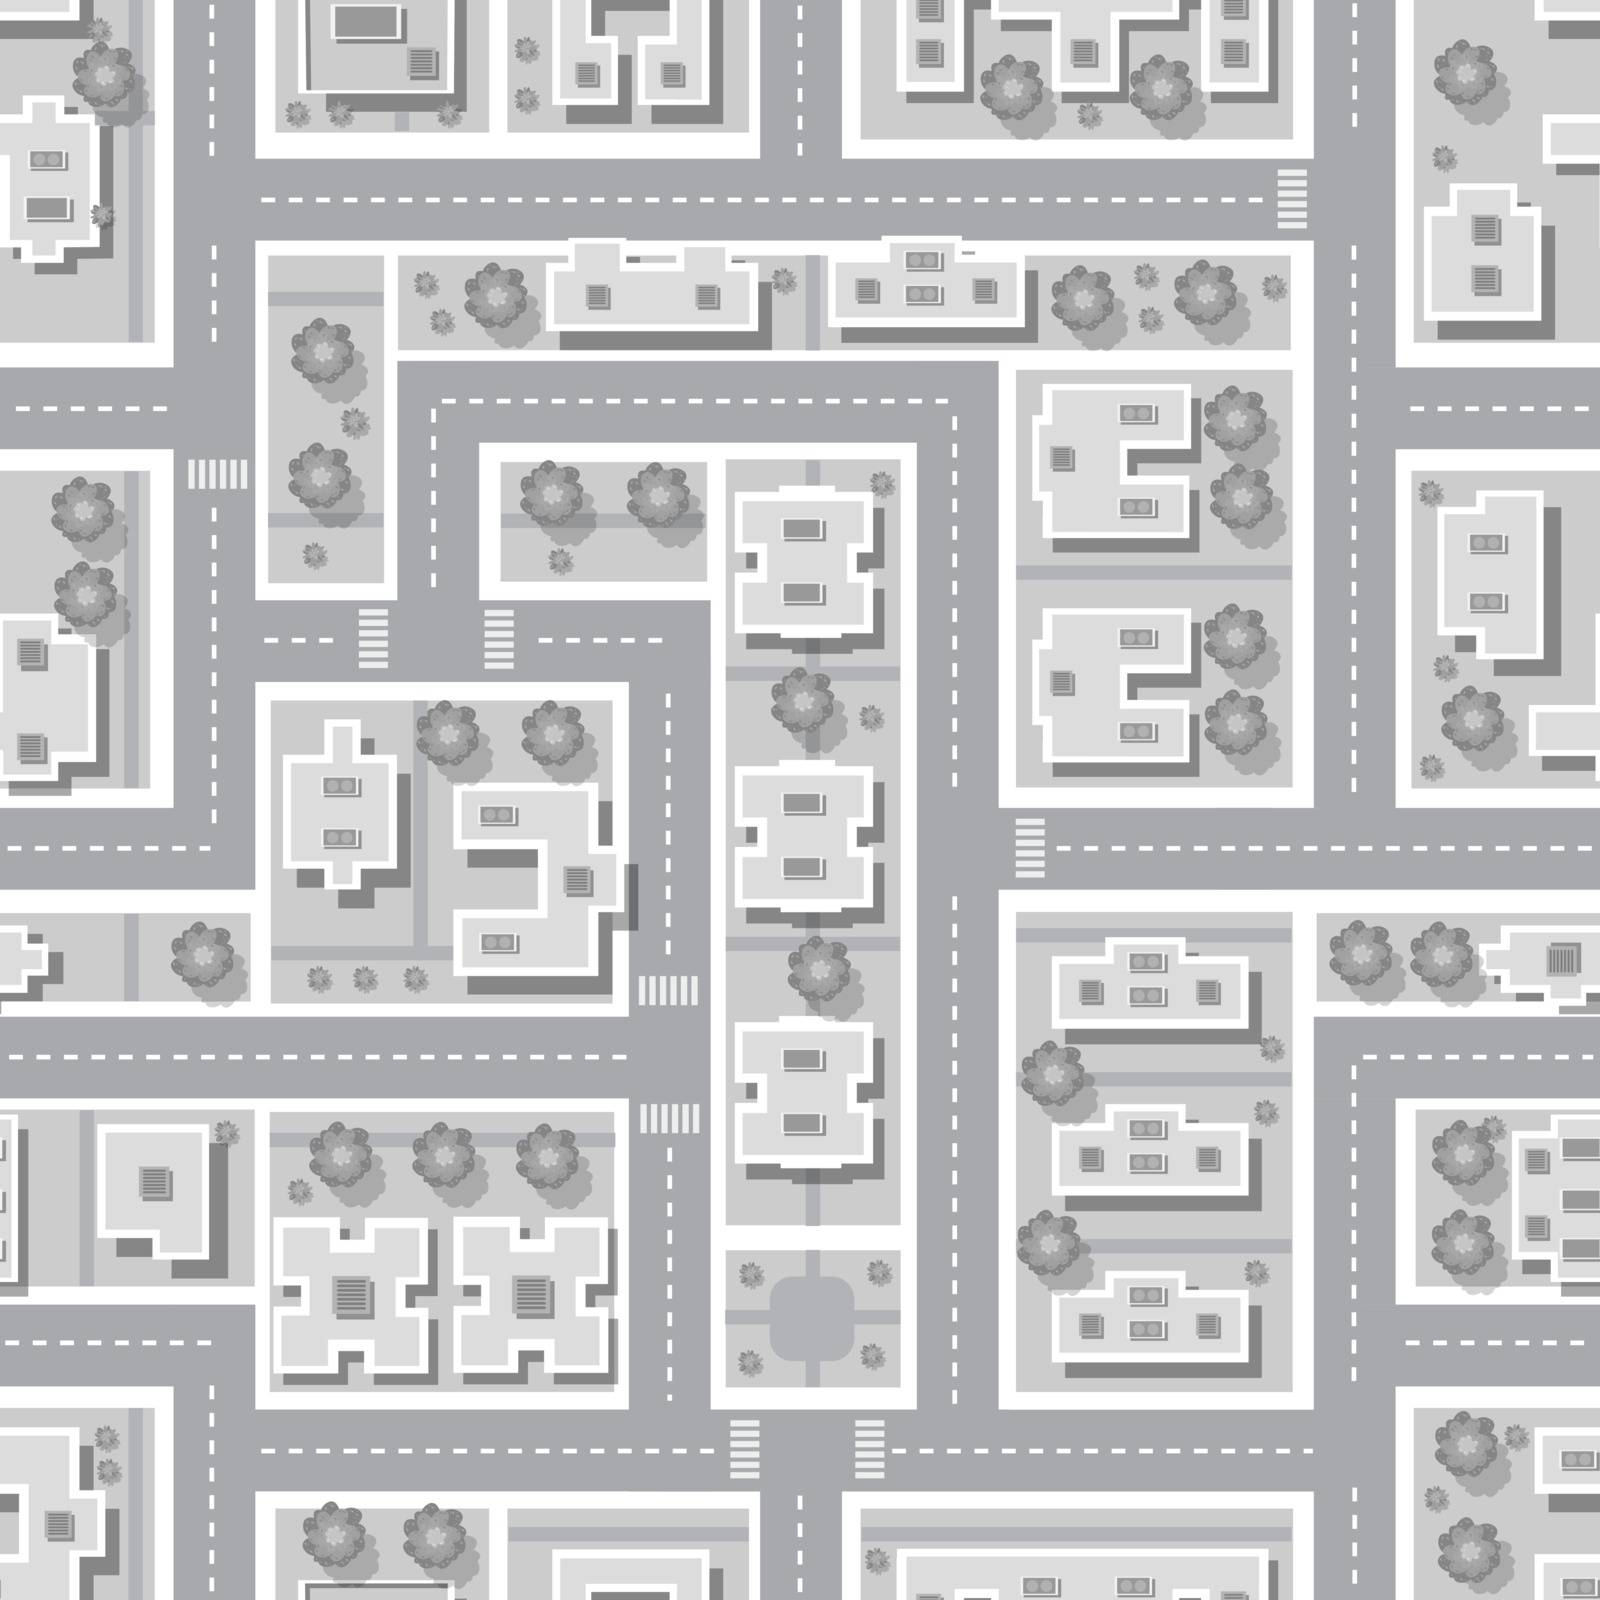 Top view of the city seamless pattern of streets, roads, houses, and cars